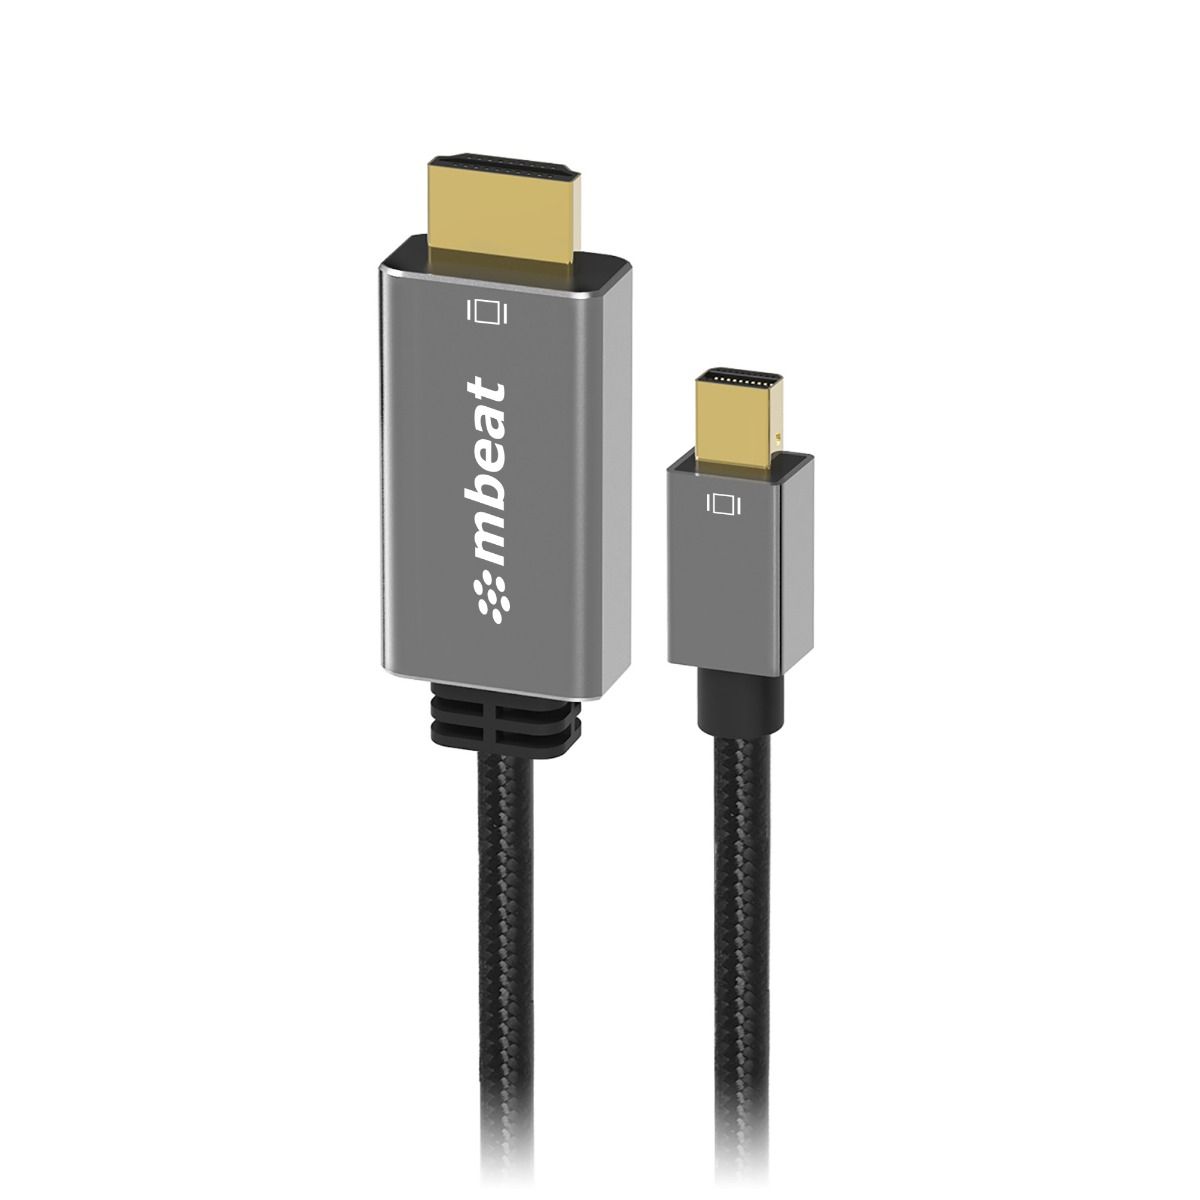 mbeat Tough Link 1.8m Mini DisplayPort to HDMI Cable - Space Grey